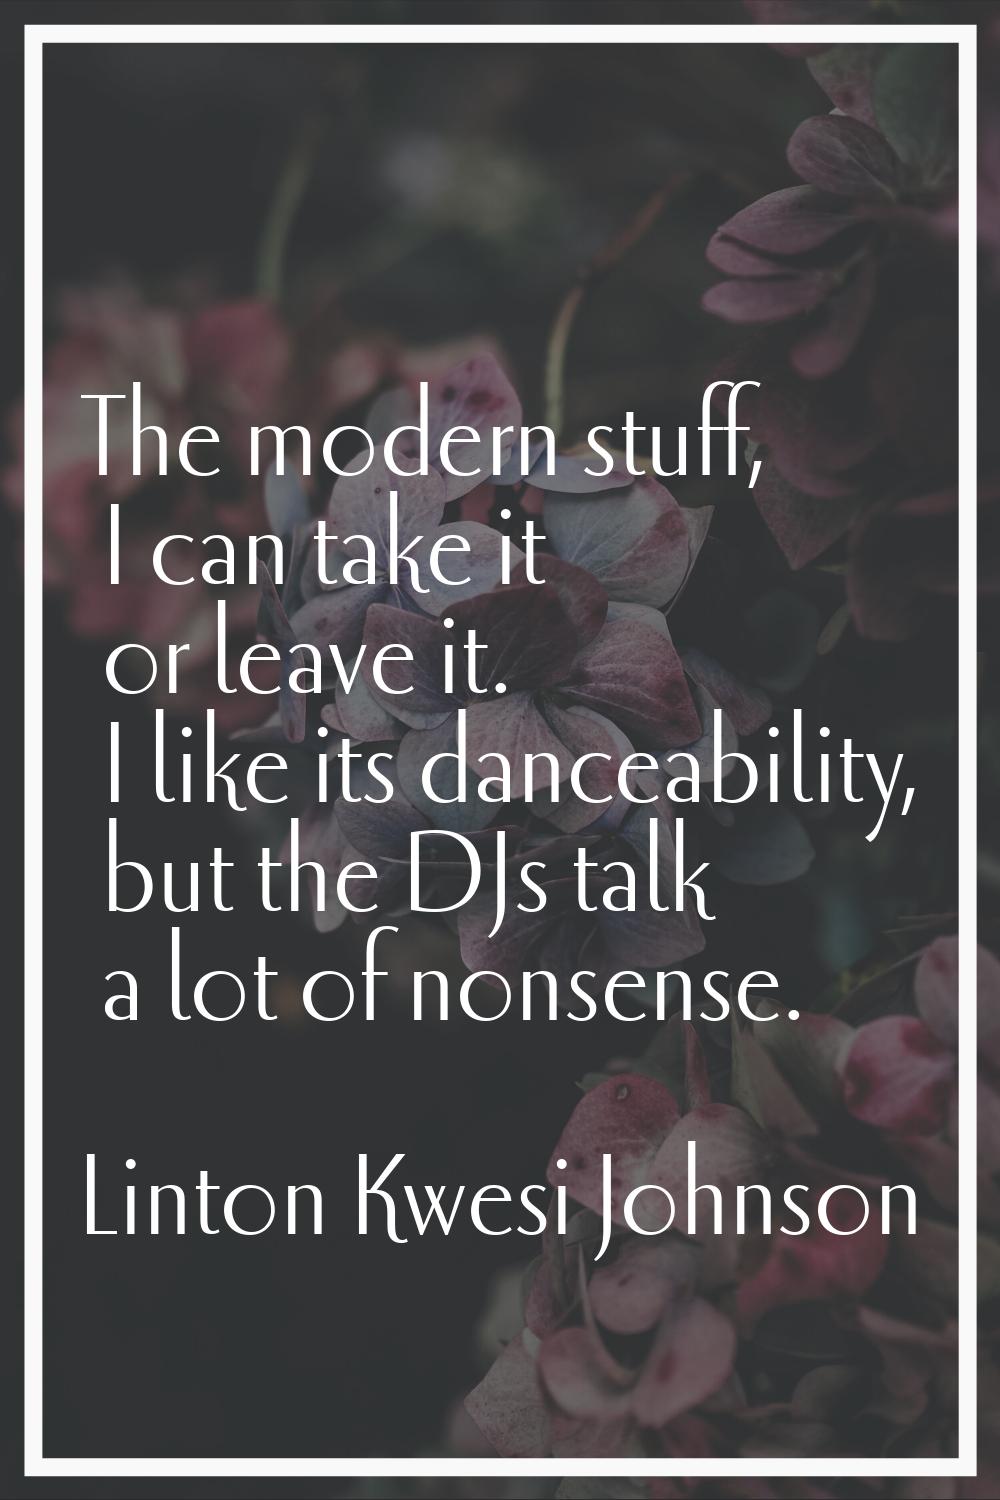 The modern stuff, I can take it or leave it. I like its danceability, but the DJs talk a lot of non